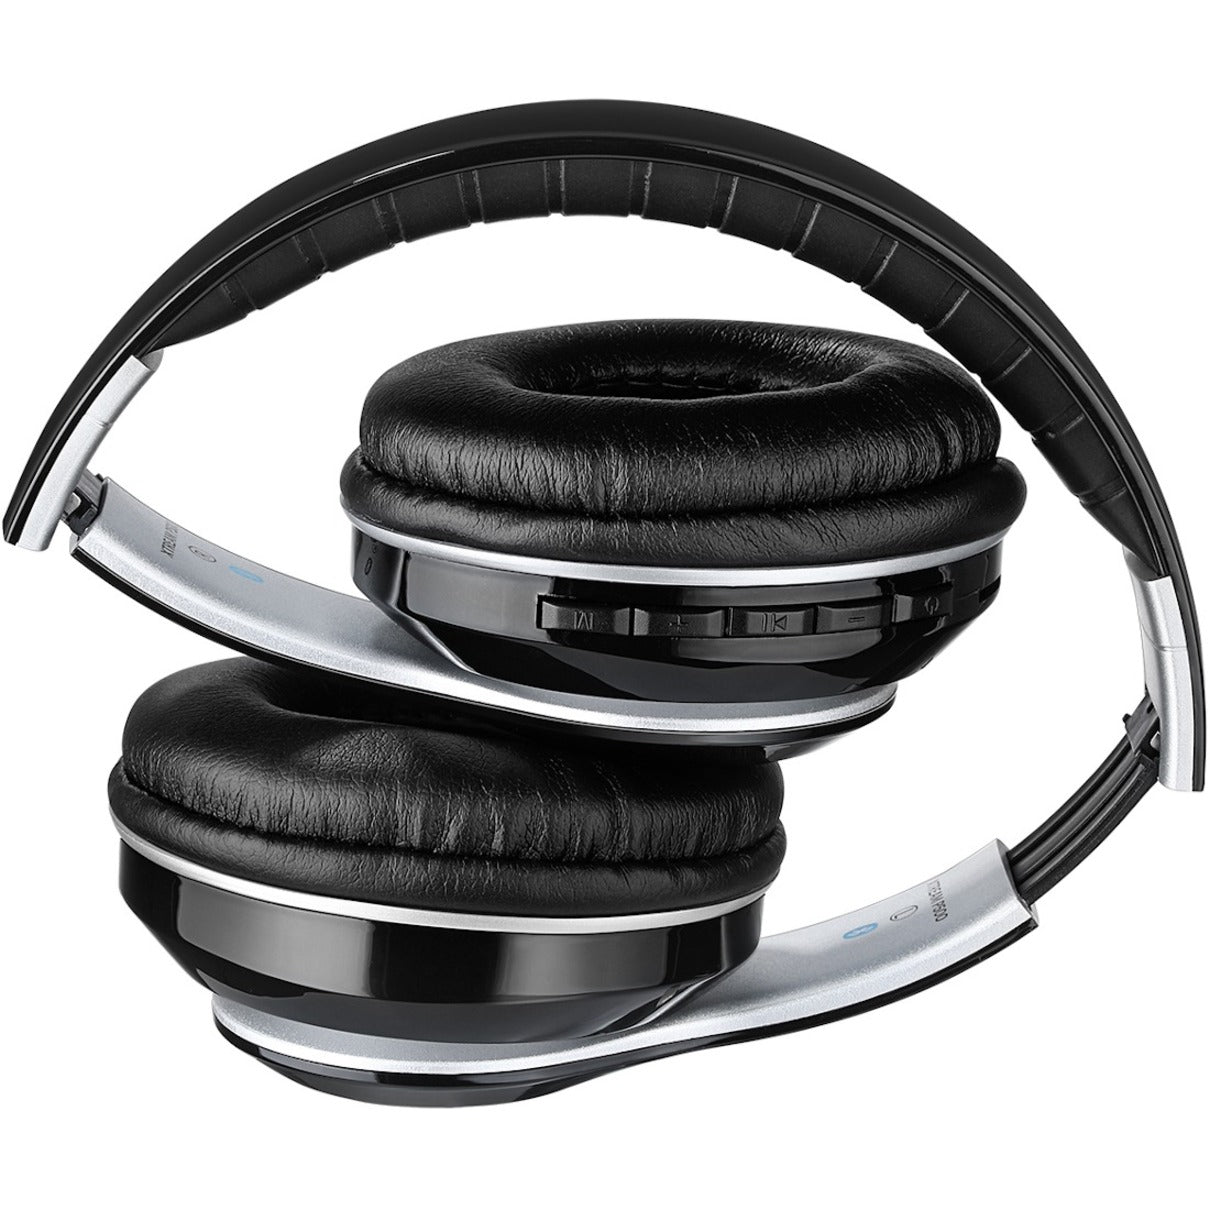 Adesso XTREAM P500 Bluetooth Stereo Headphone with Built-in Microphone, Rechargeable Battery, Foldable, Crystal Sound Technology